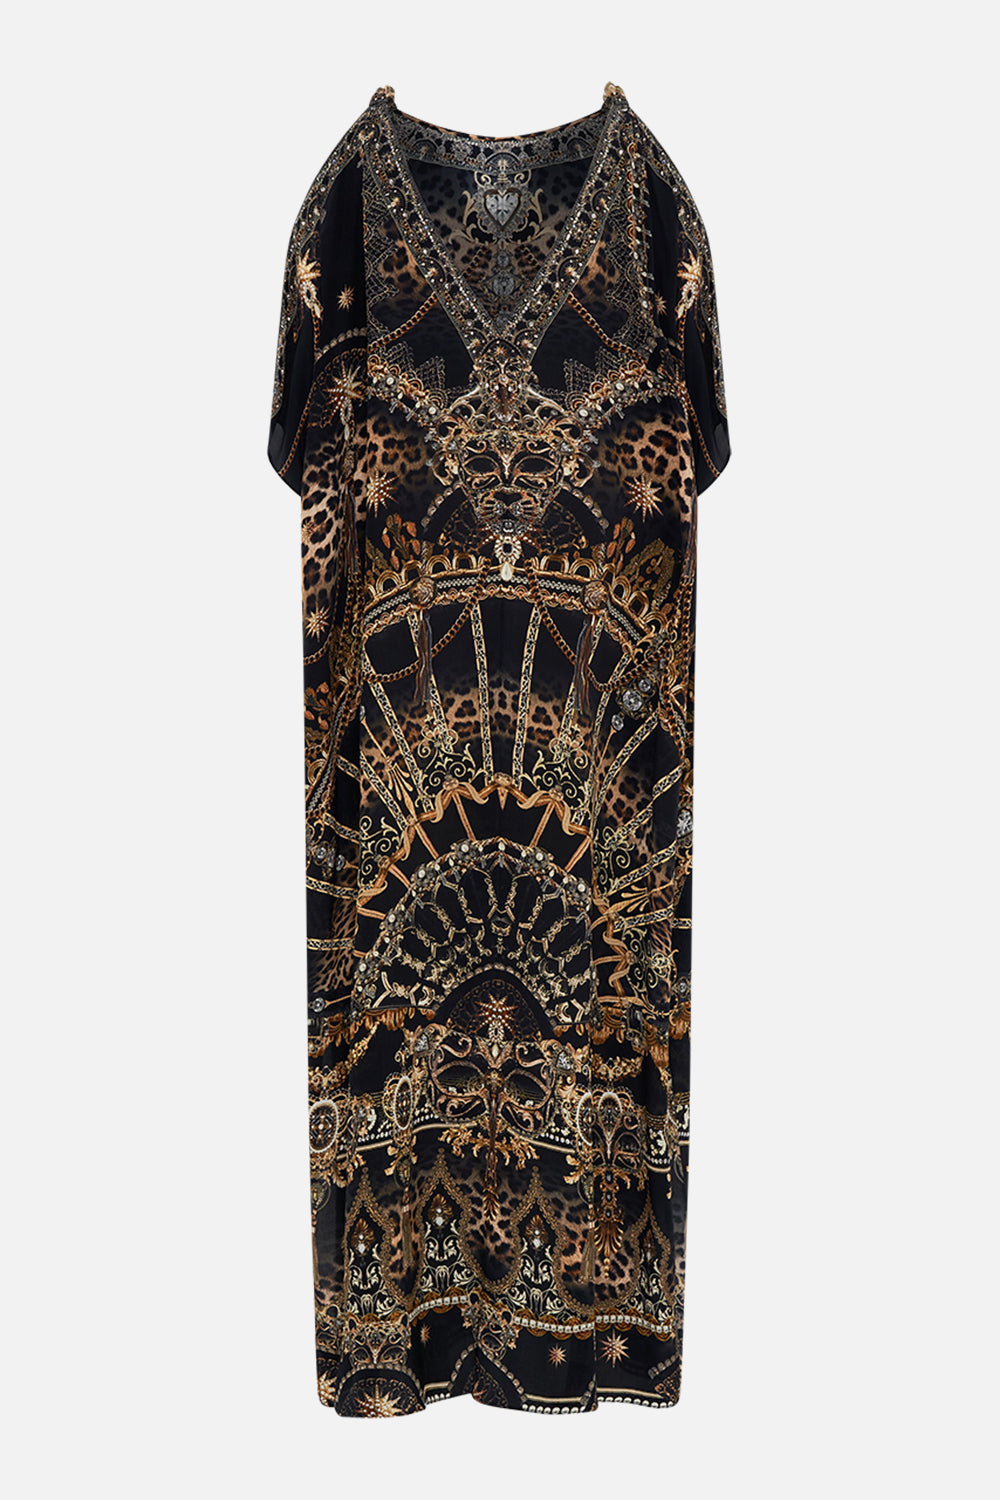 Back product view of CAMILLA silk kaftan with hardware in Masked  at Moonlight print